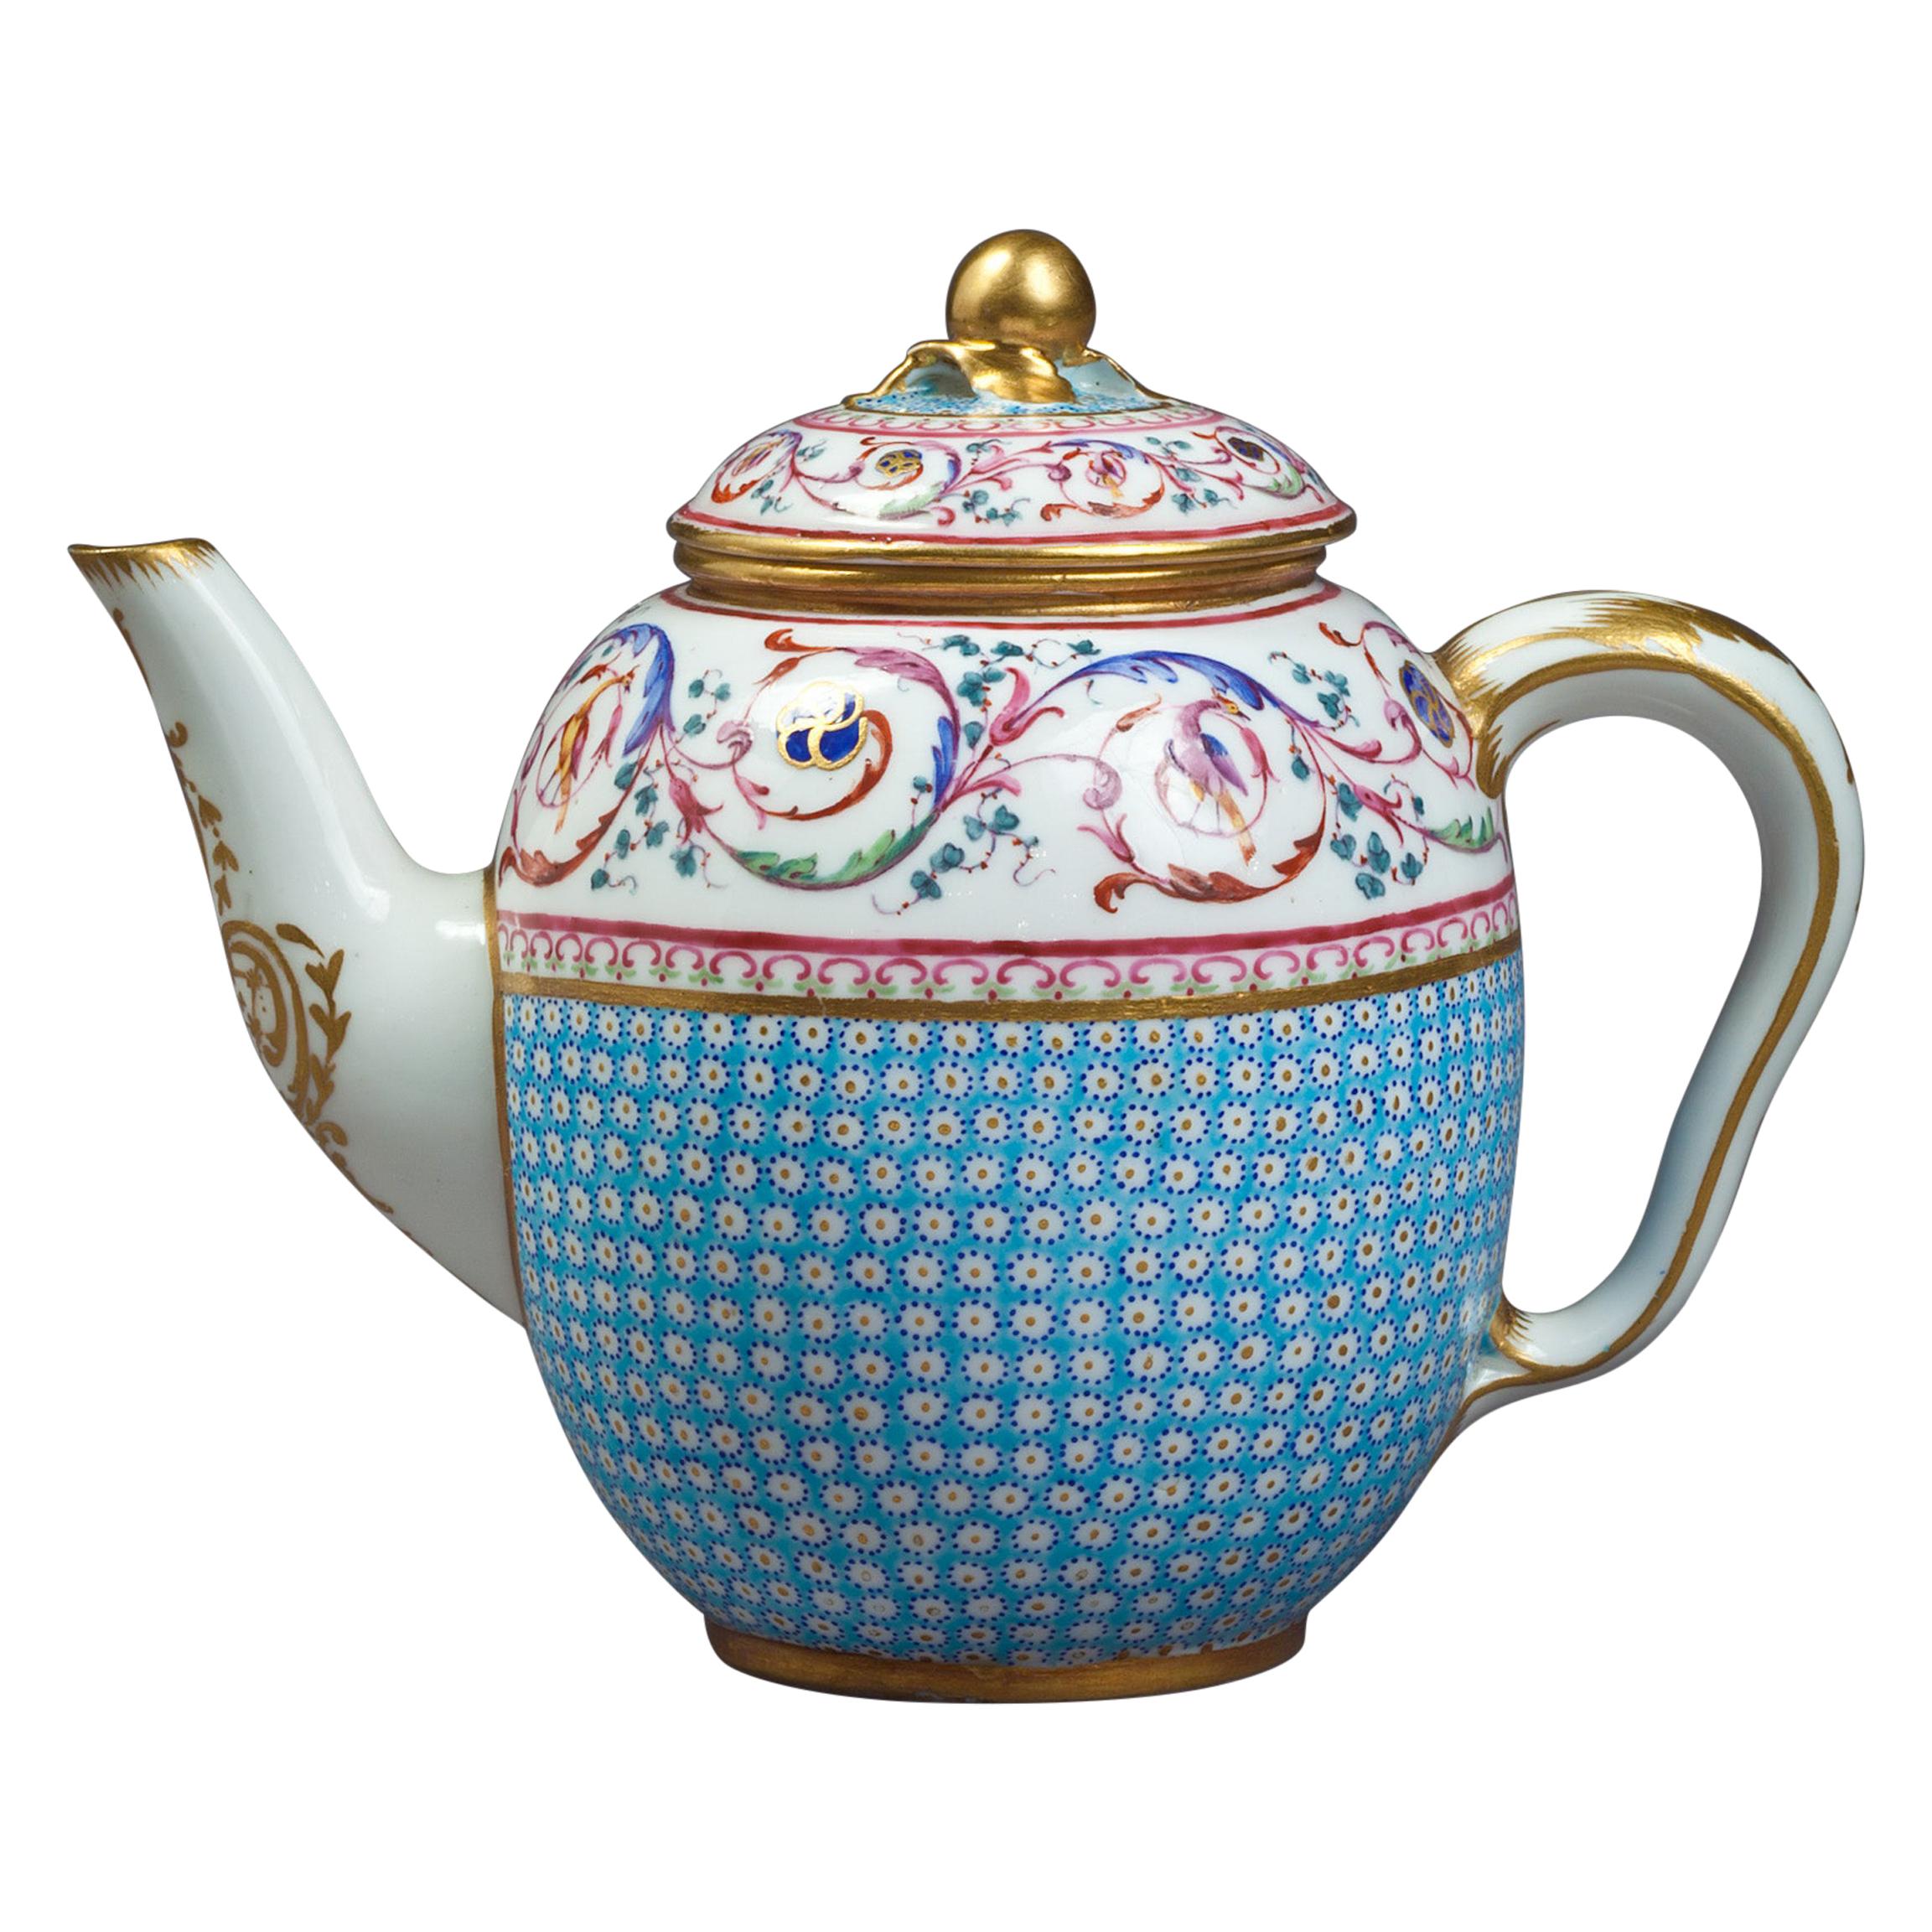 Sevres Sky Blue Ground Porcelain Teapot and Cover, Dated 1785